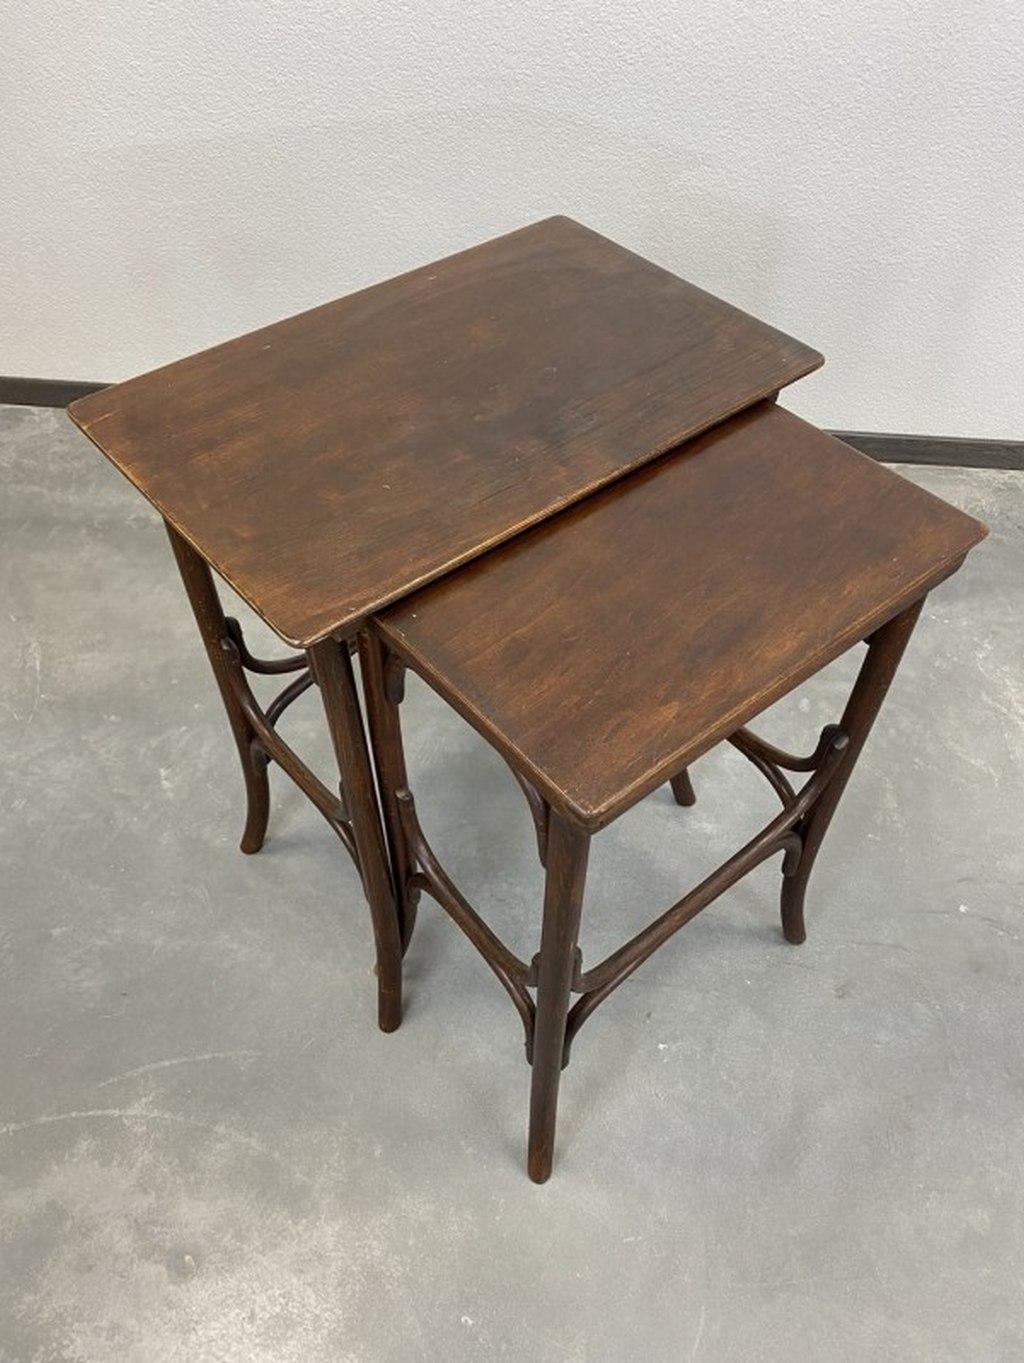 Nesting tables by Thonet Debrecsen Hungary in original condition.